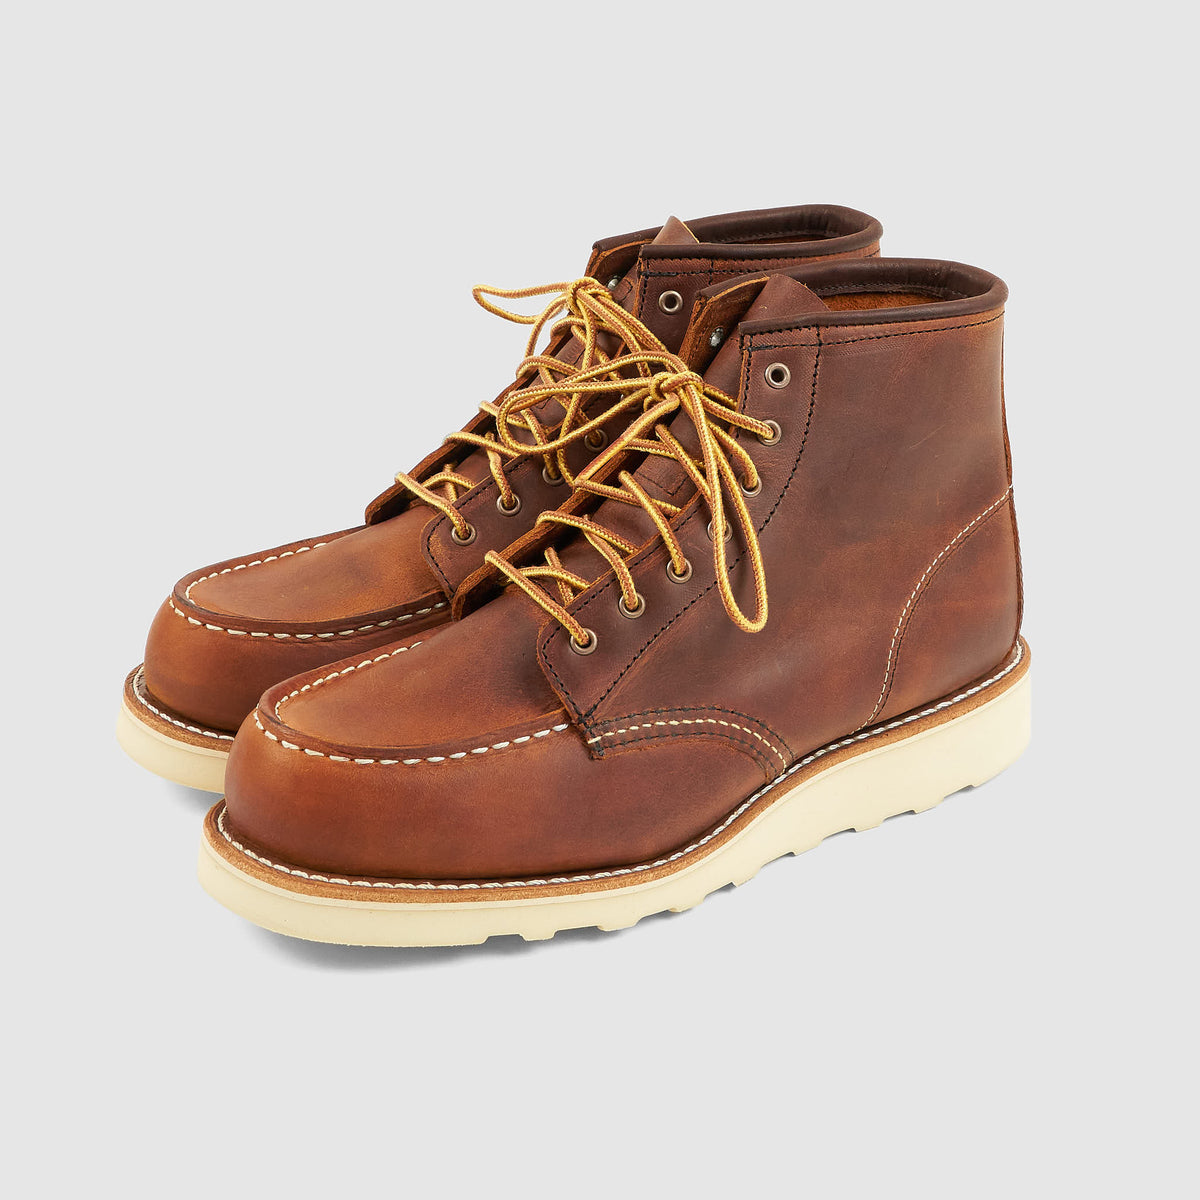 Red Wing Heritage Shoes Ladies Classic Moc-Toe, 3375, 3373, 3428